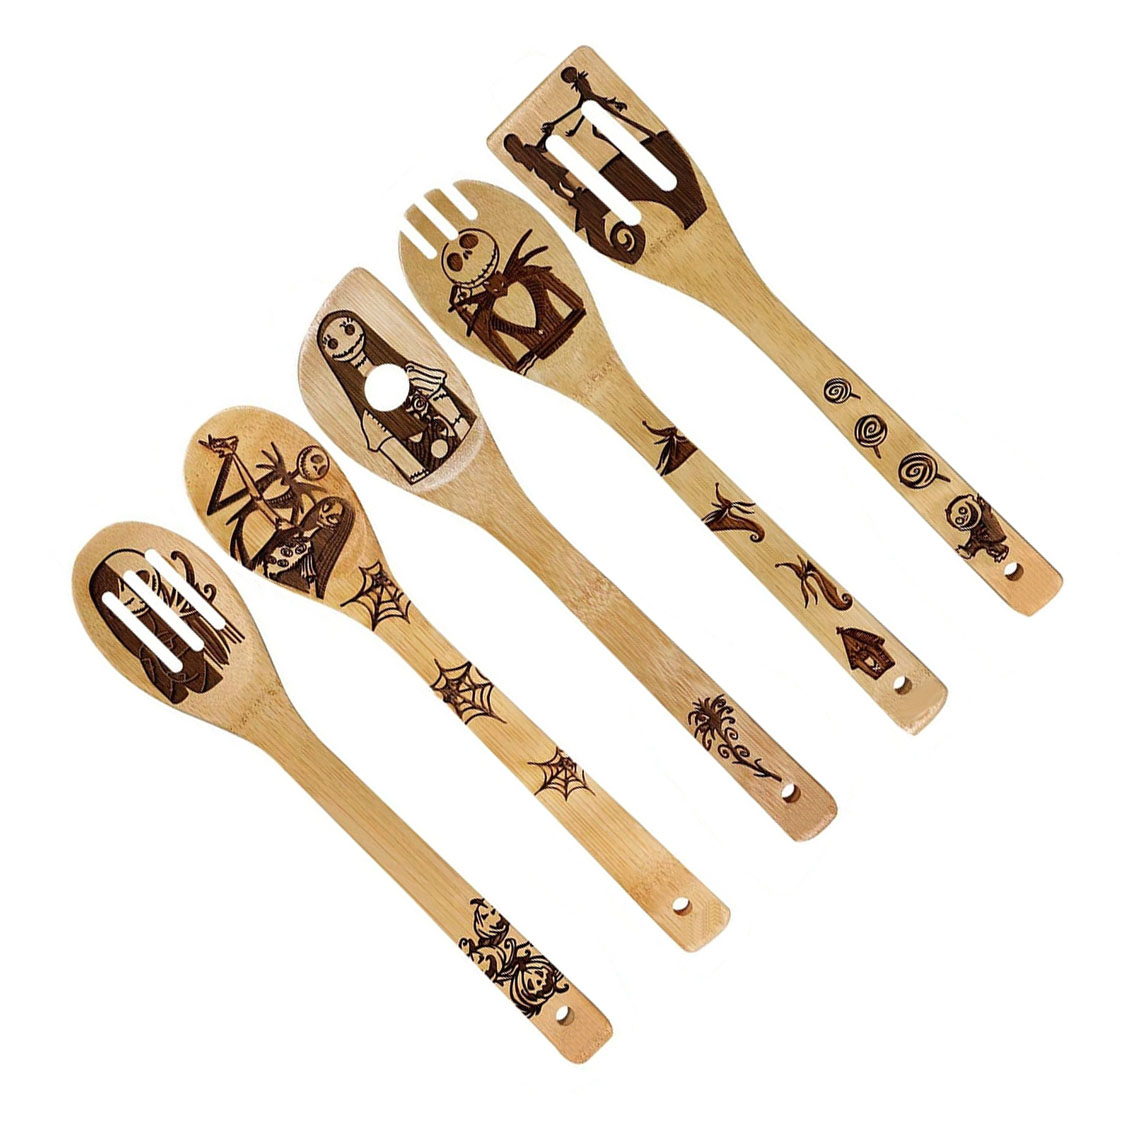 bamboo utensils with laser engraving